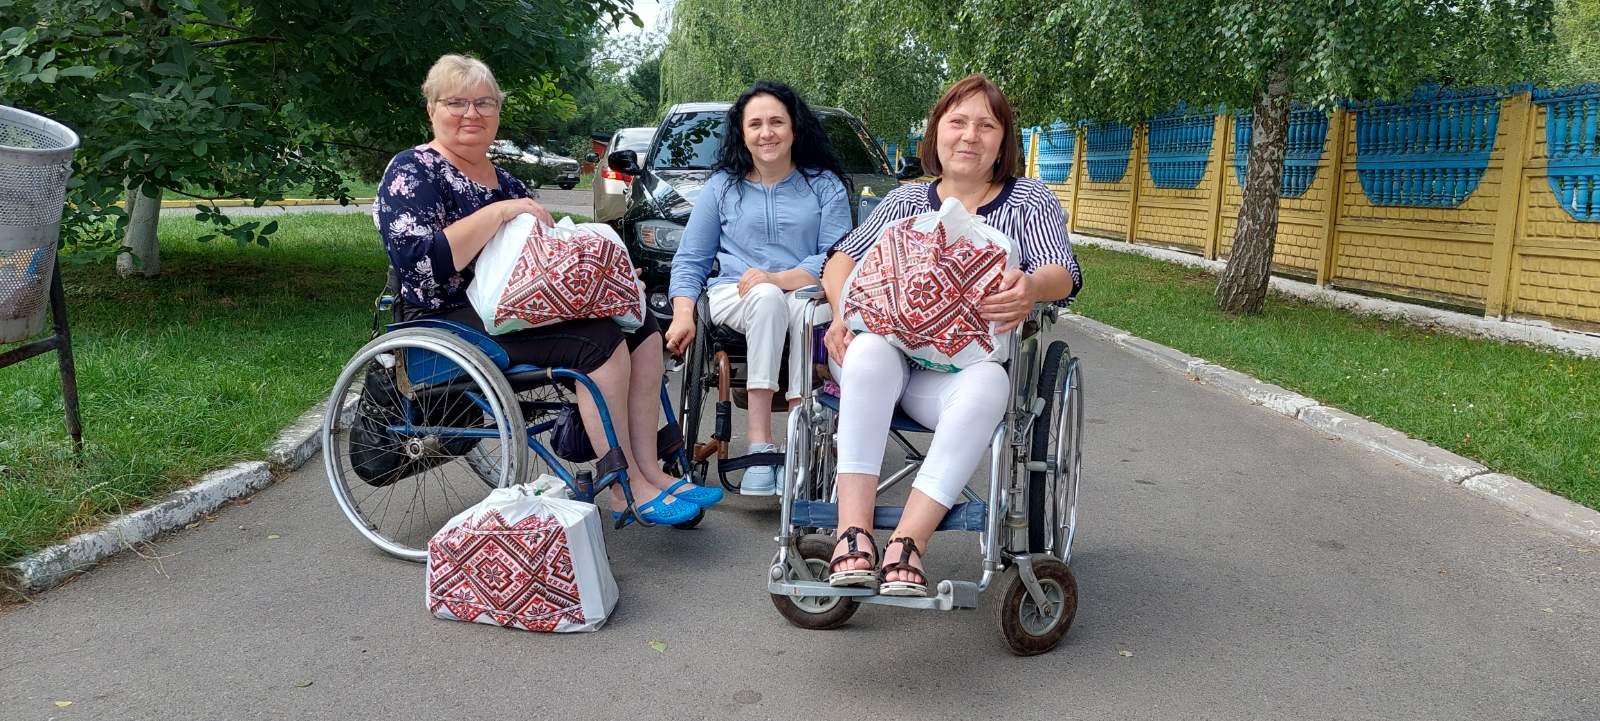 National Assembly of People with Disabilities of Ukraine (NAPD), an association of more than 100 organizations representing people with disabilities from different regions of Ukraine, works with various UN agencies, including UN Women, to include people with disabilities in humanitarian assistance and advocate for their rights. Photo: Courtesy of NAPD